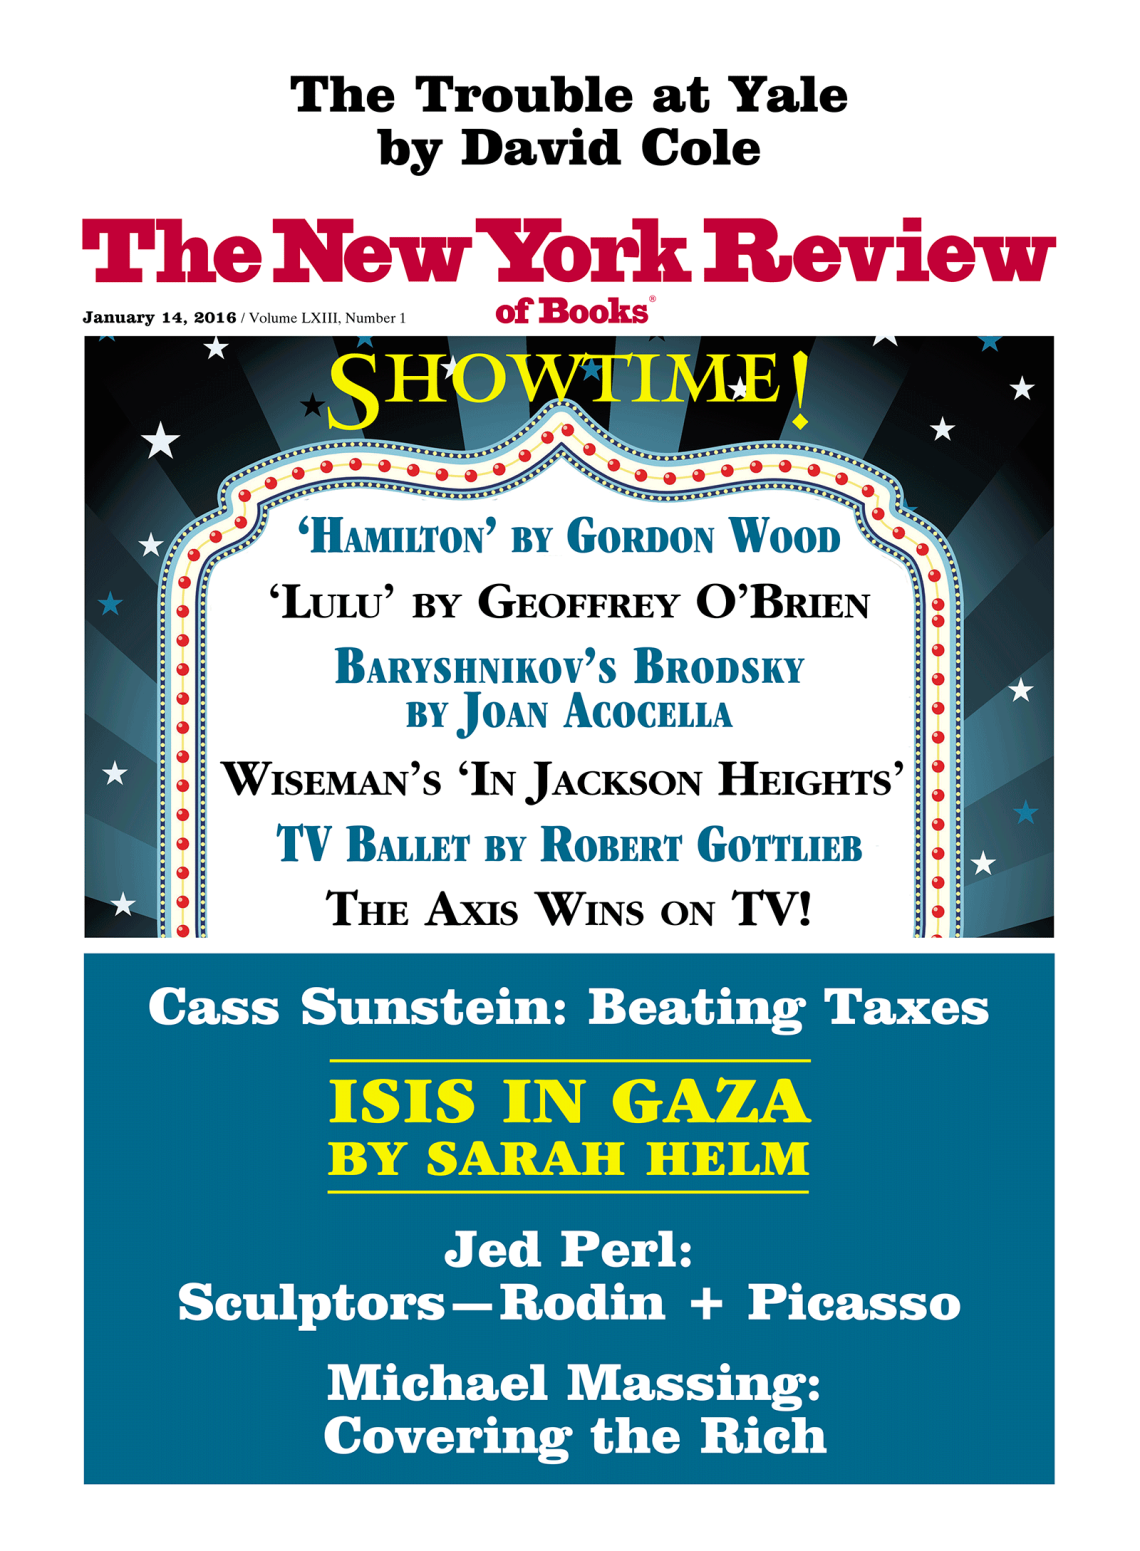 Image of the January 14, 2016 issue cover.